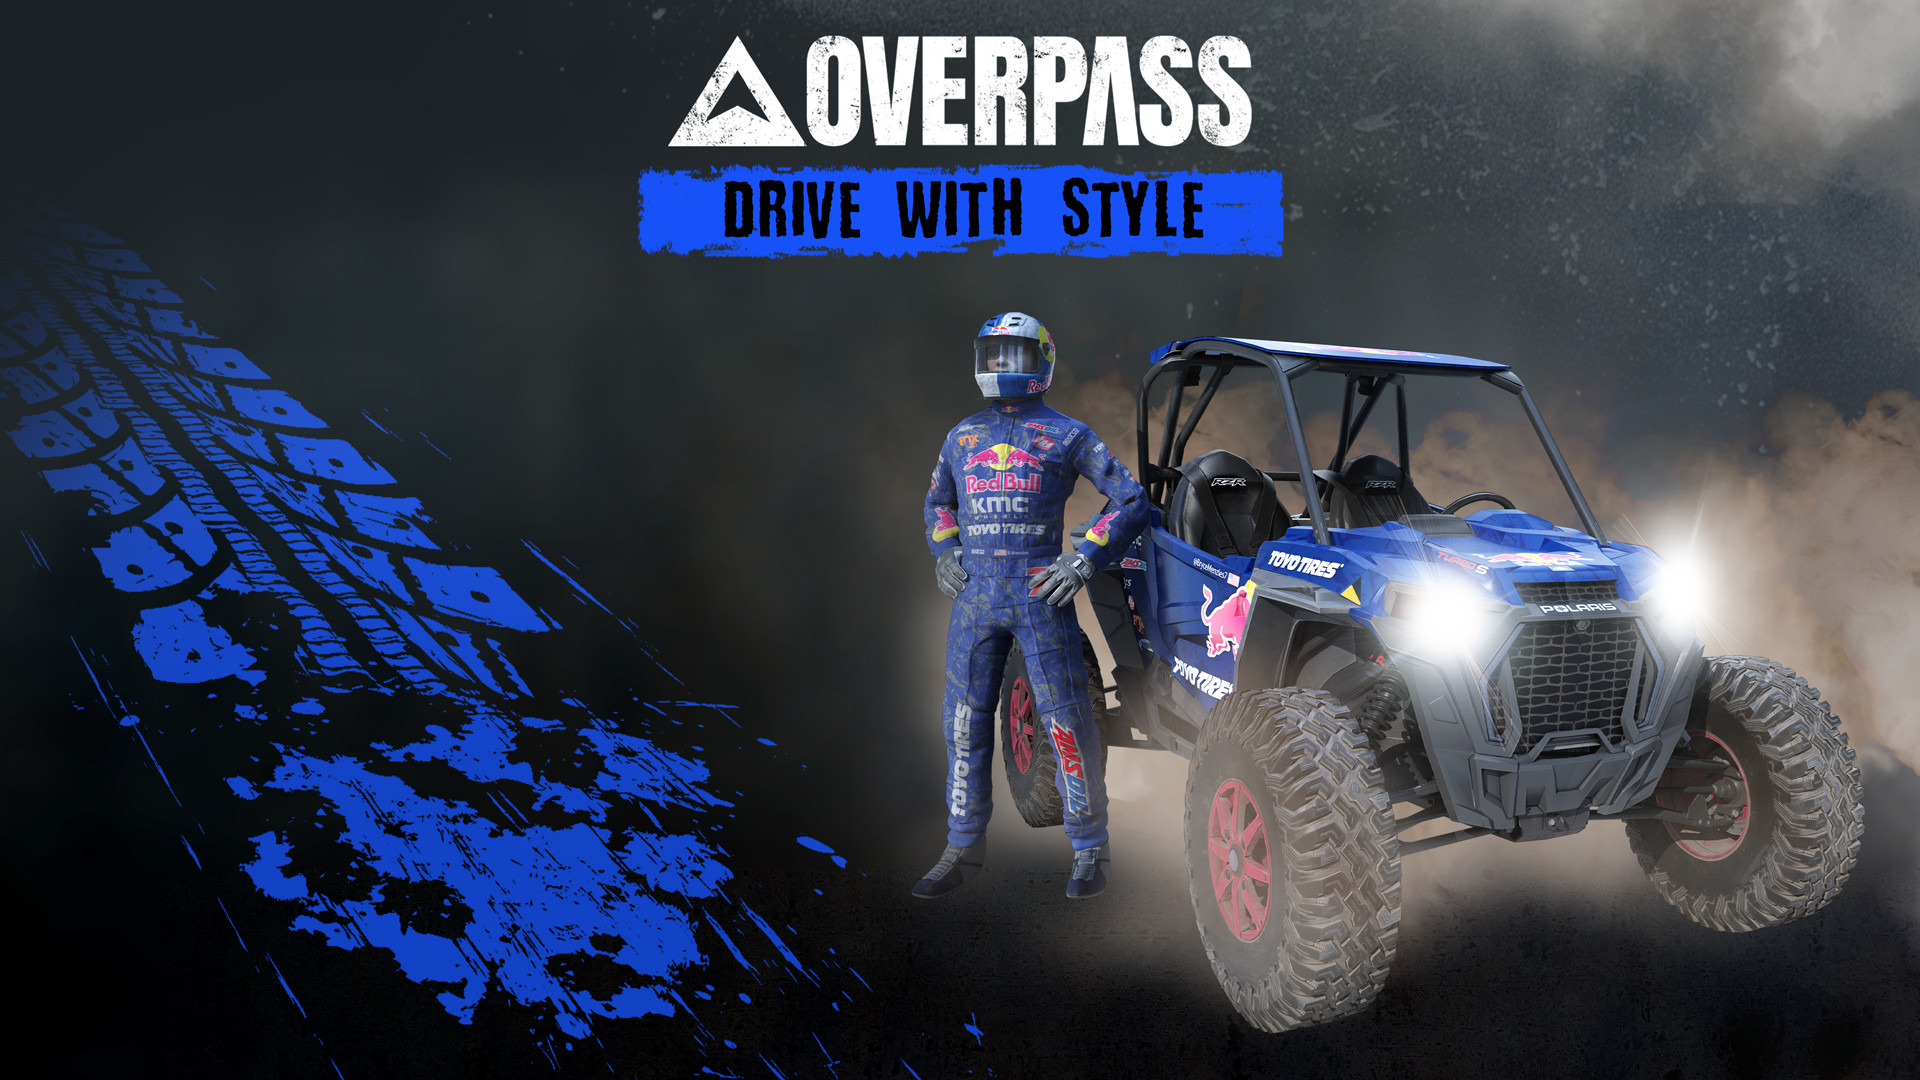 [$ 1.23] OVERPASS - Drive With Style DLC Steam CD Key